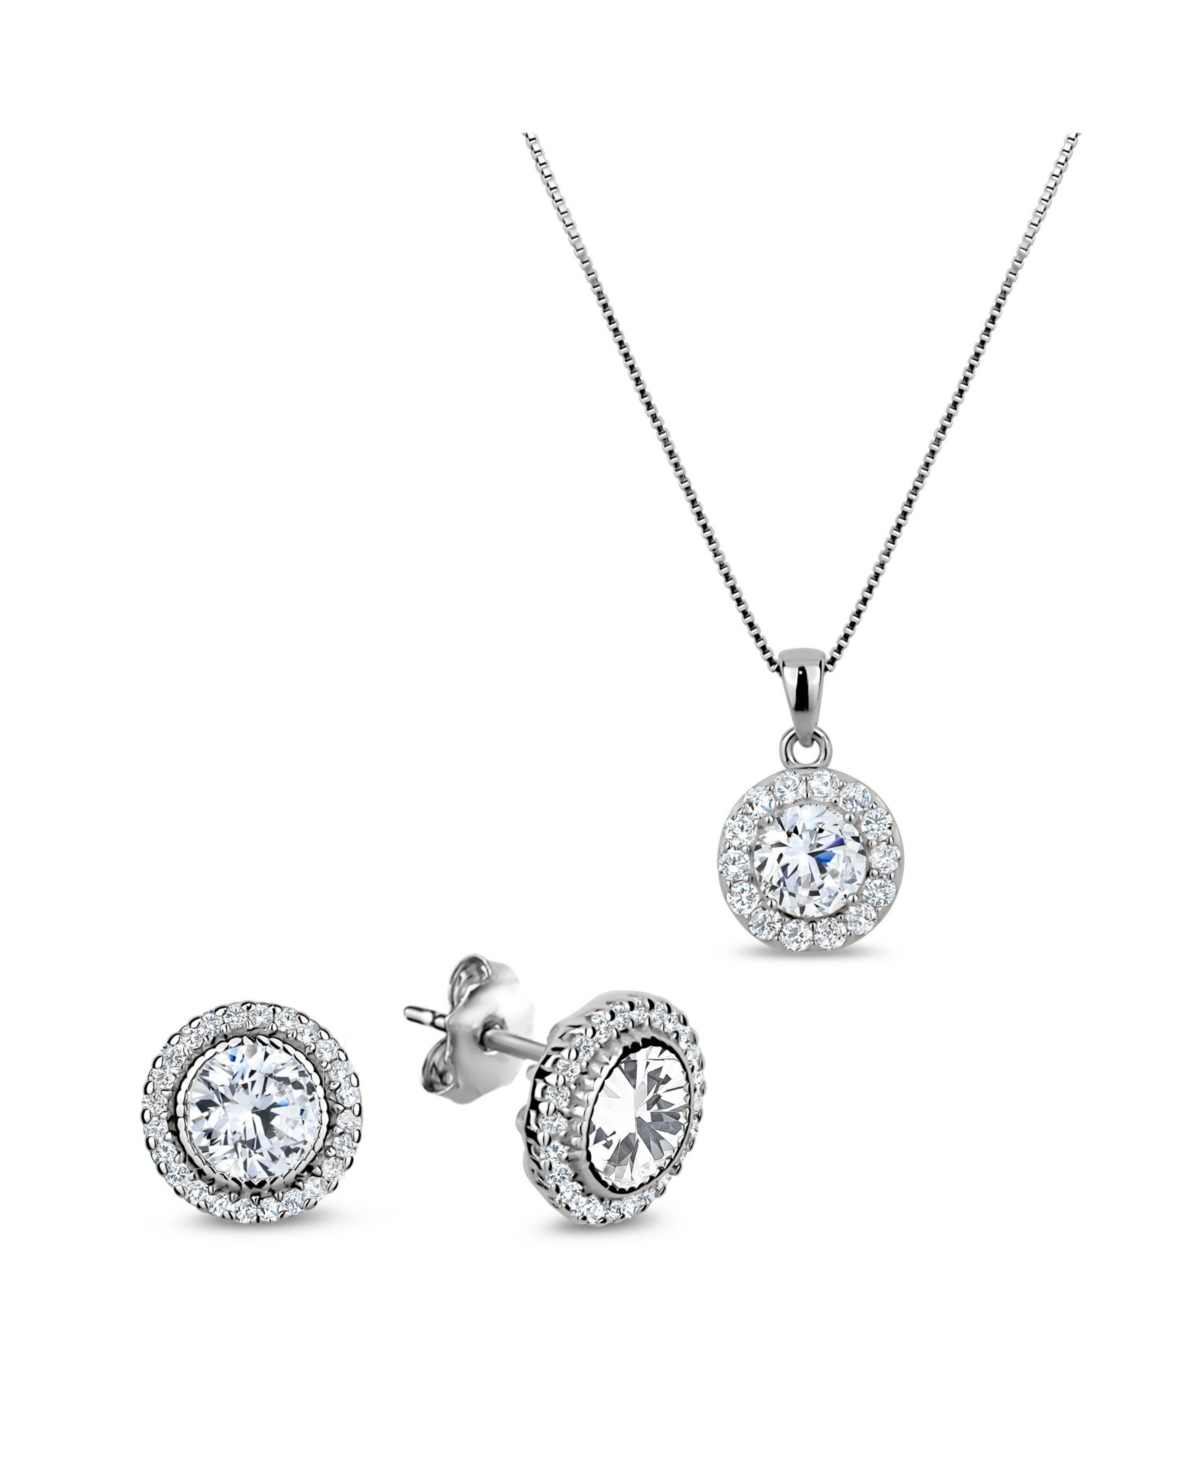 CLUB ROCHELIER 5A CUBIC ZIRCONIA ROUND PENDANT NECKLACE AND EARRINGS SET